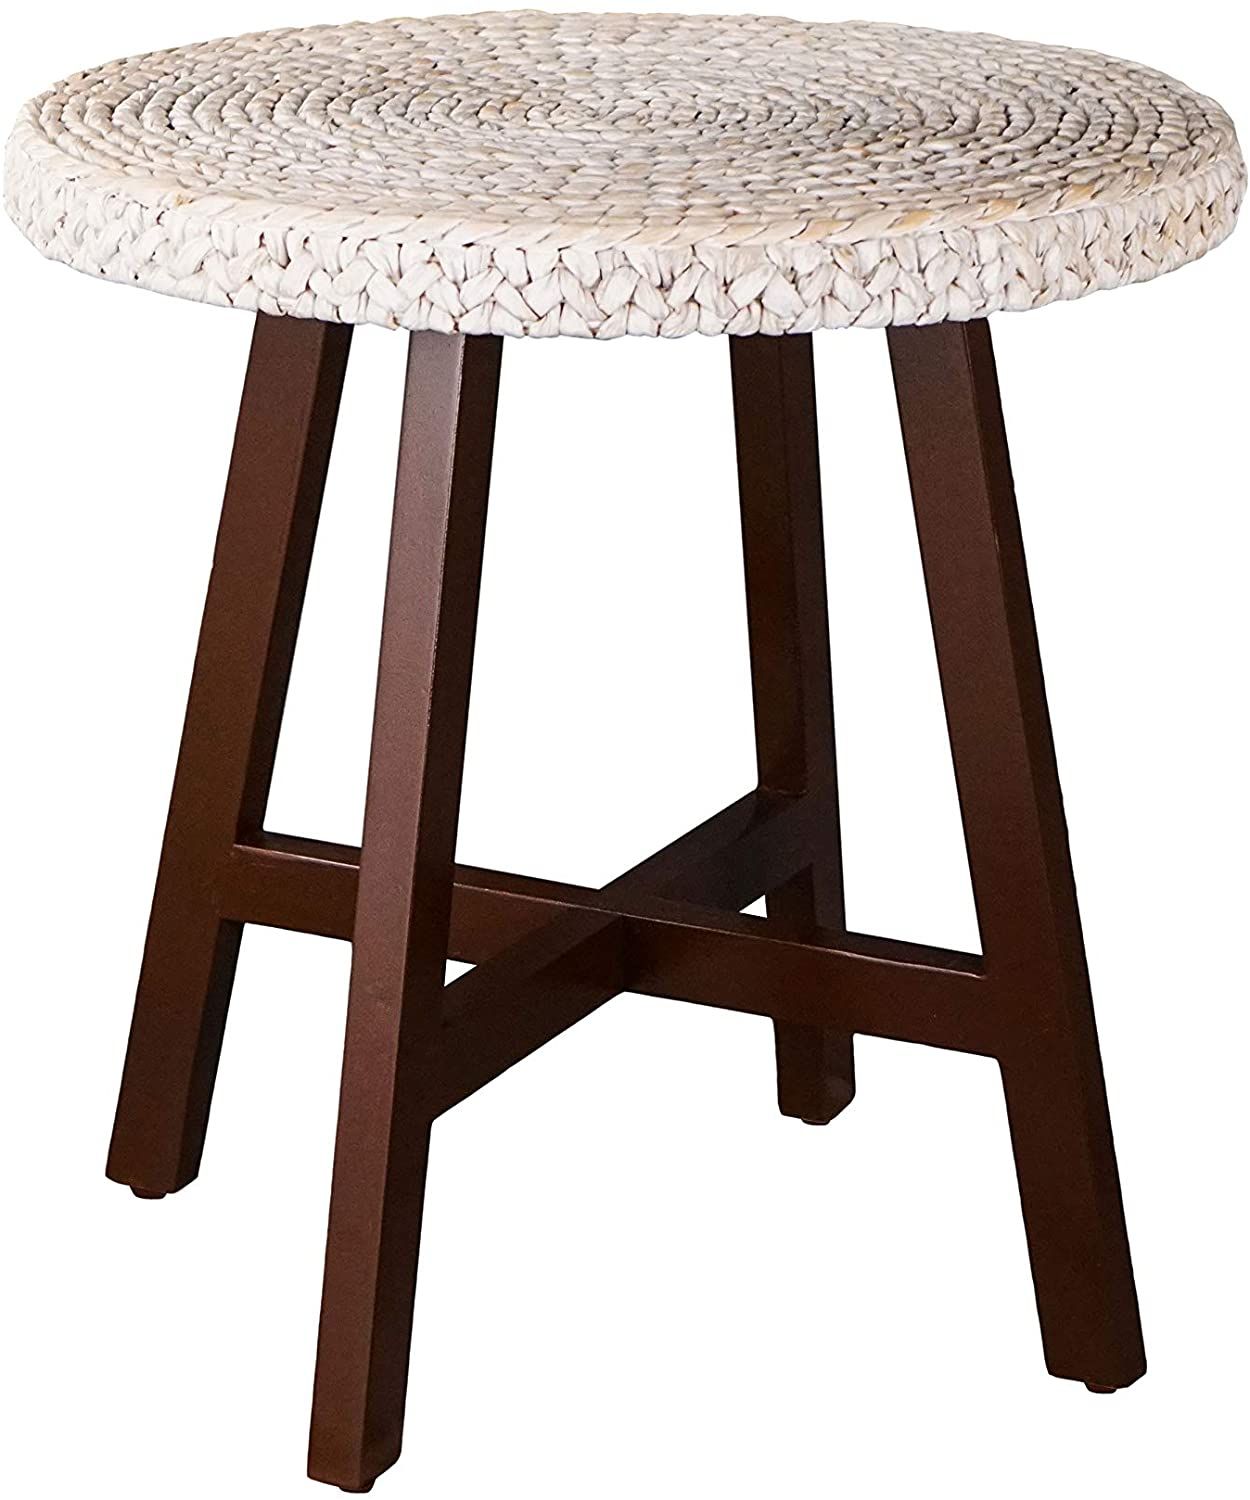 Randefurn Seagrass Side Table Round Accent End Table Inside Natural Seagrass Coffee Tables (View 3 of 15)